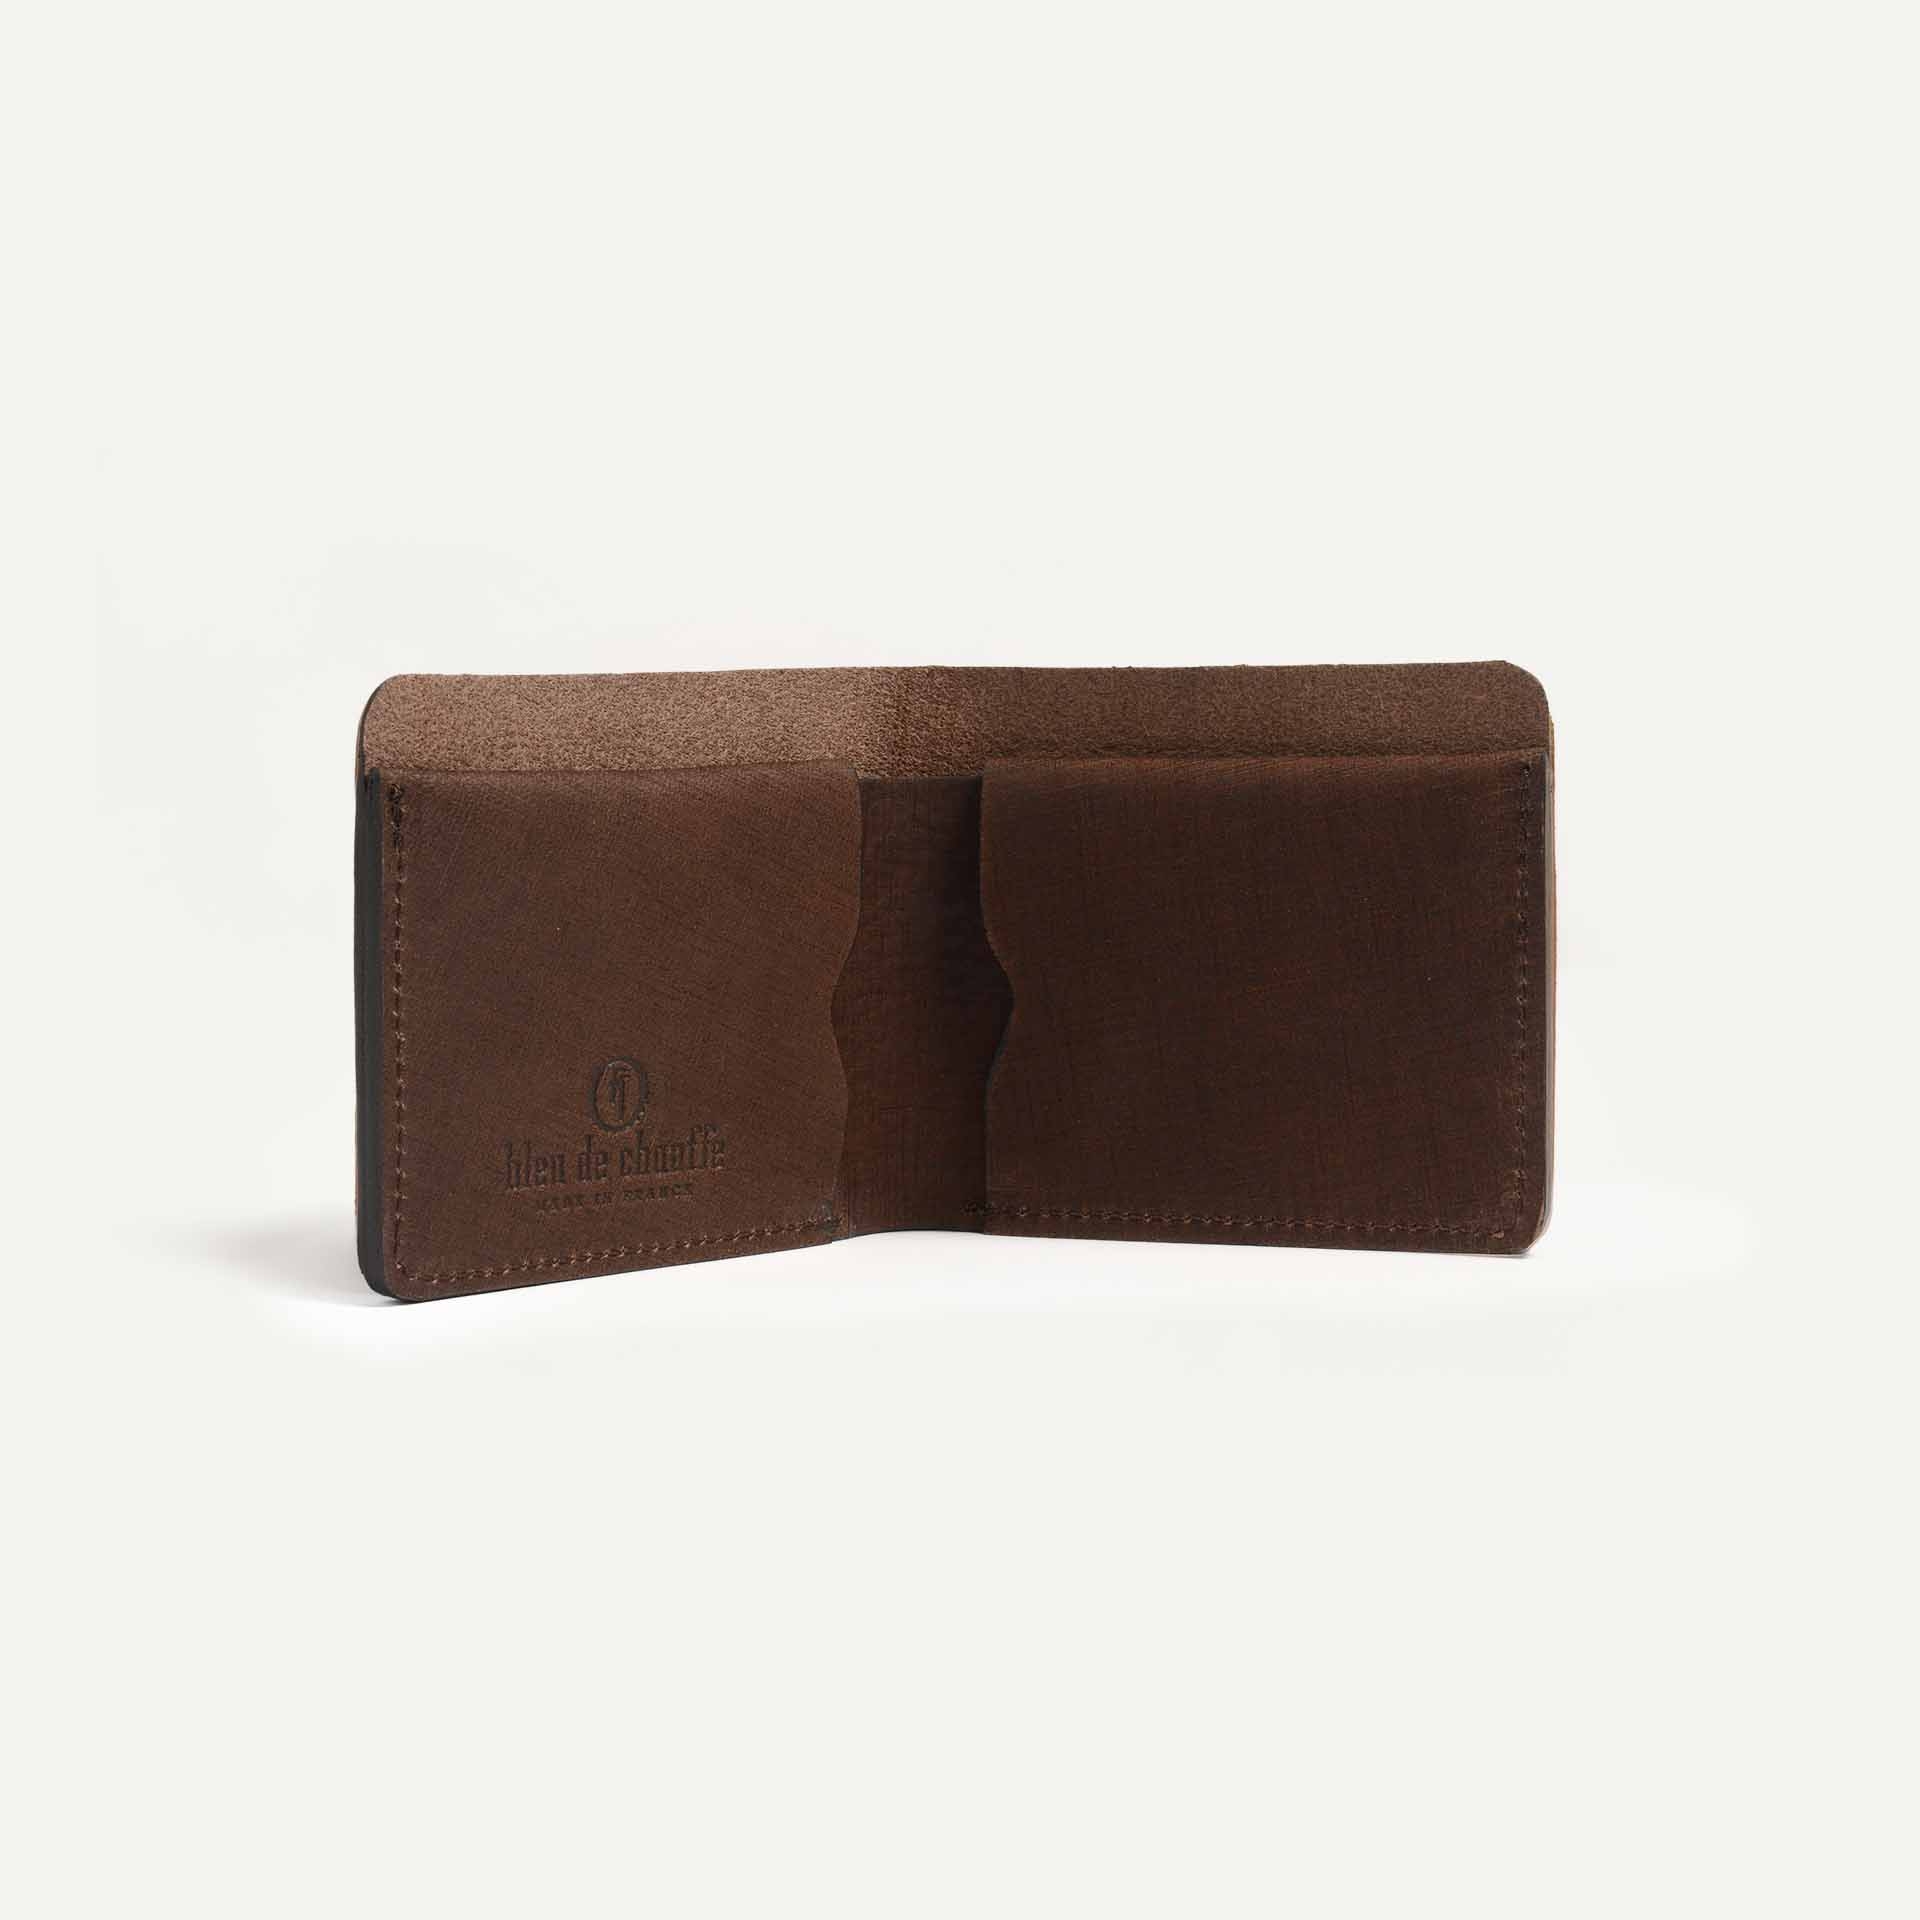 PEZE wallet - Coffee / Waxed Leather (image n°4)